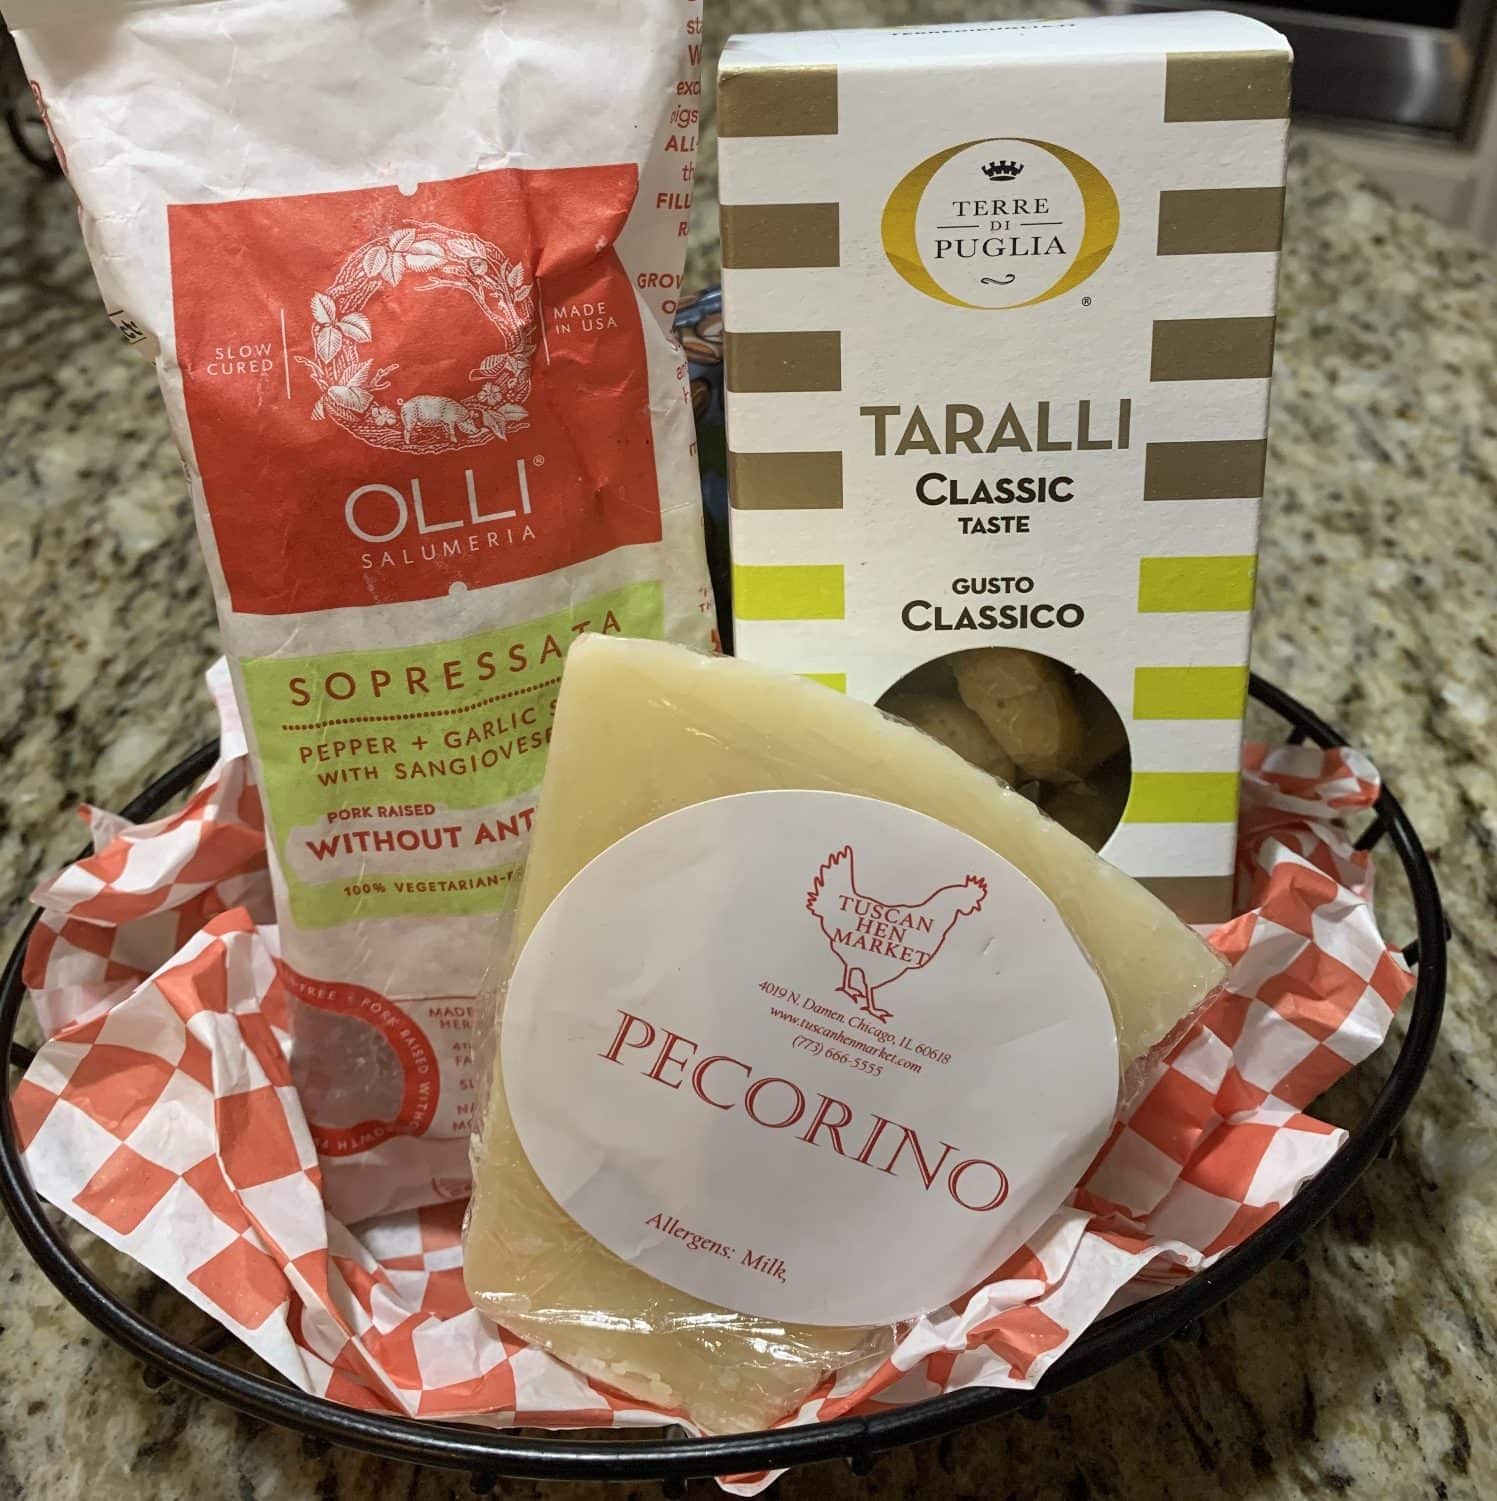 A cheese, cracker and salami gift set from Tuscan Hen Market